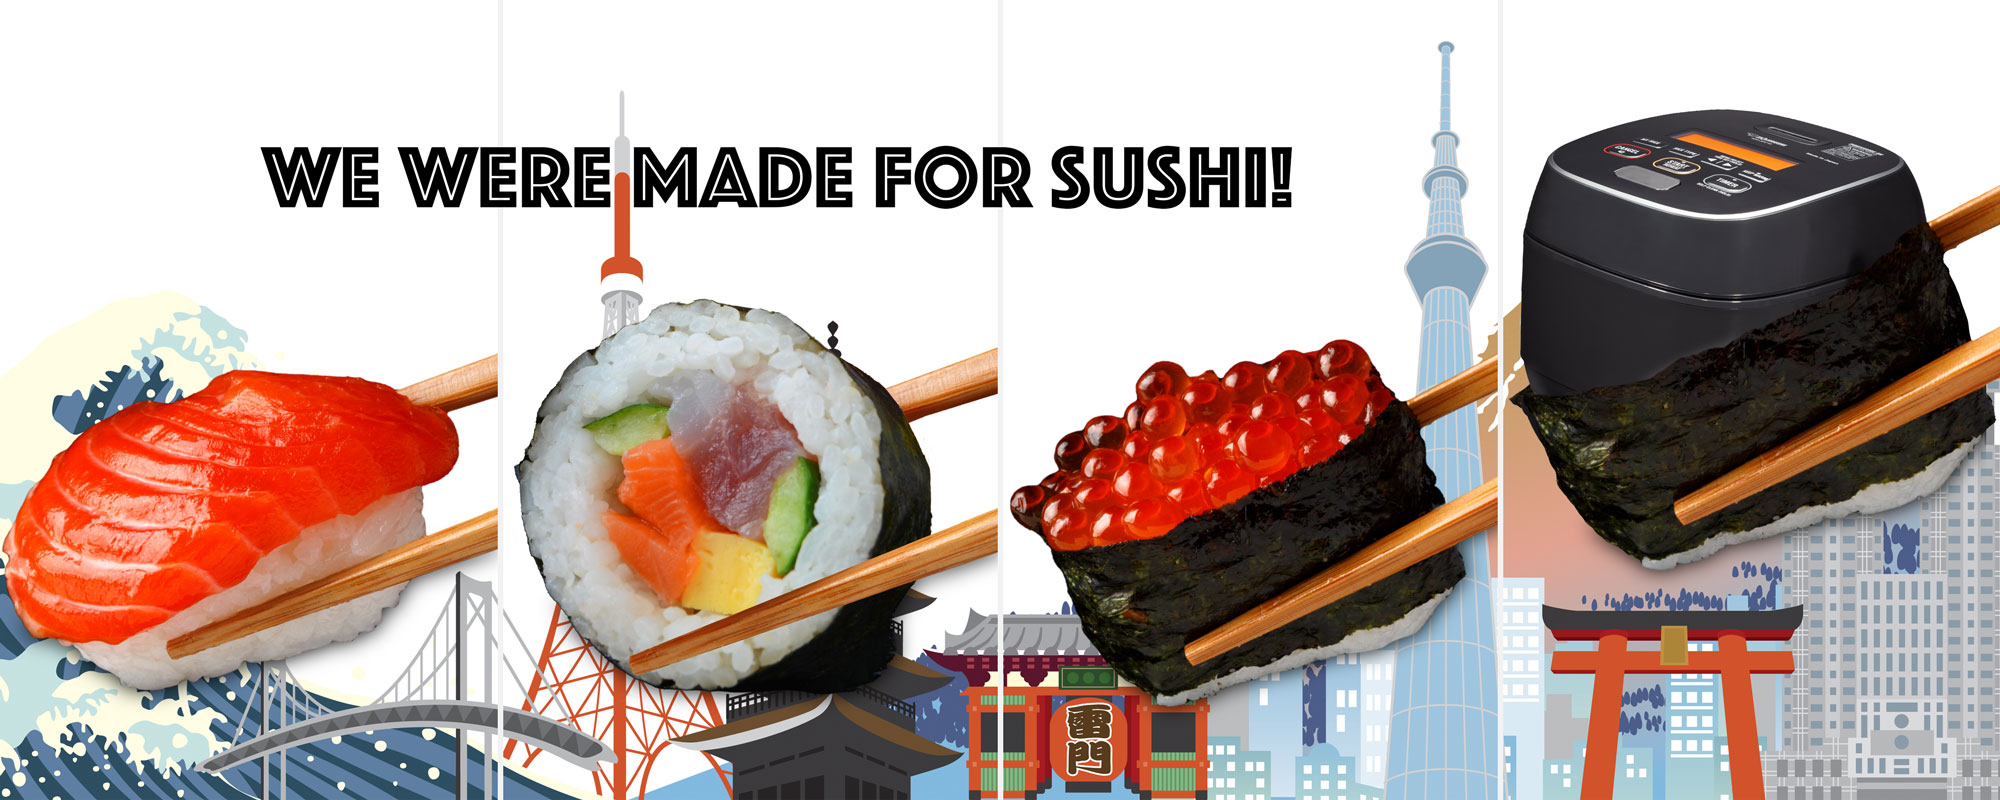 We were made for sushi!